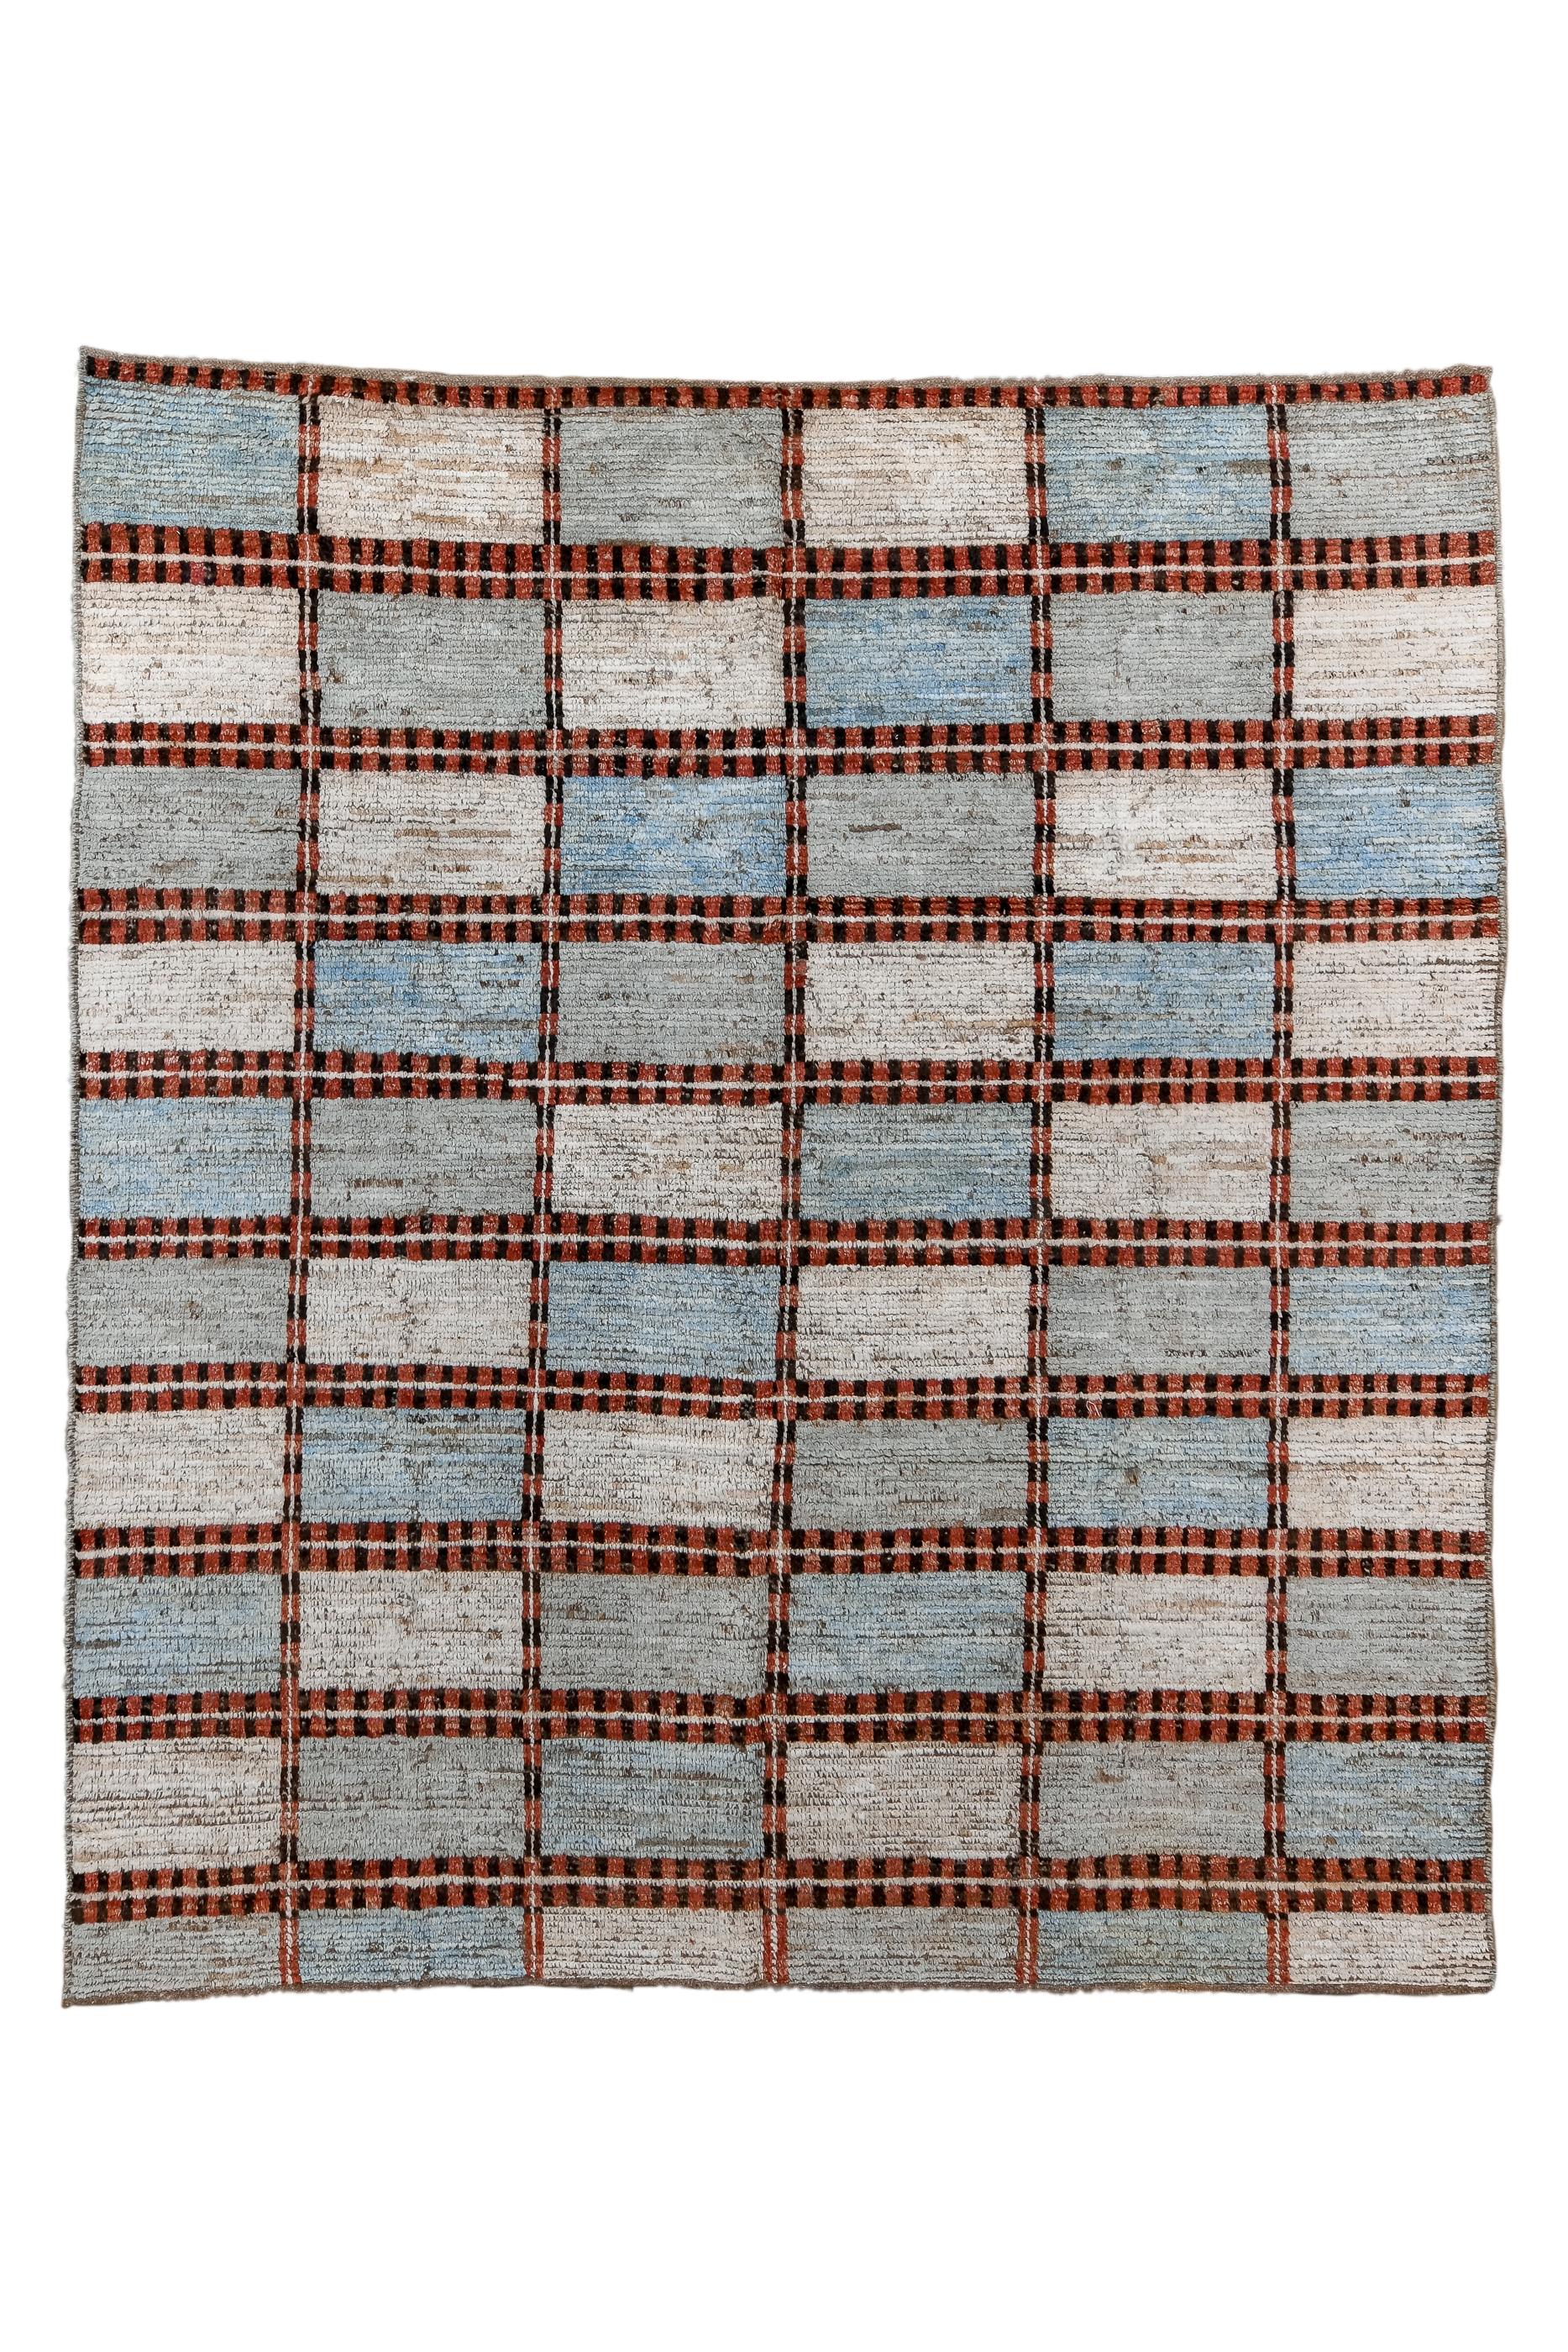 This innovative long pile, coarse weave carpet shows a six by ten gridwork of rectangles in abrashed pastels of blue and beige. A double bar framework holds it all in place.  No real end or side borders. Wool foundation. Coarse weave with wefts very